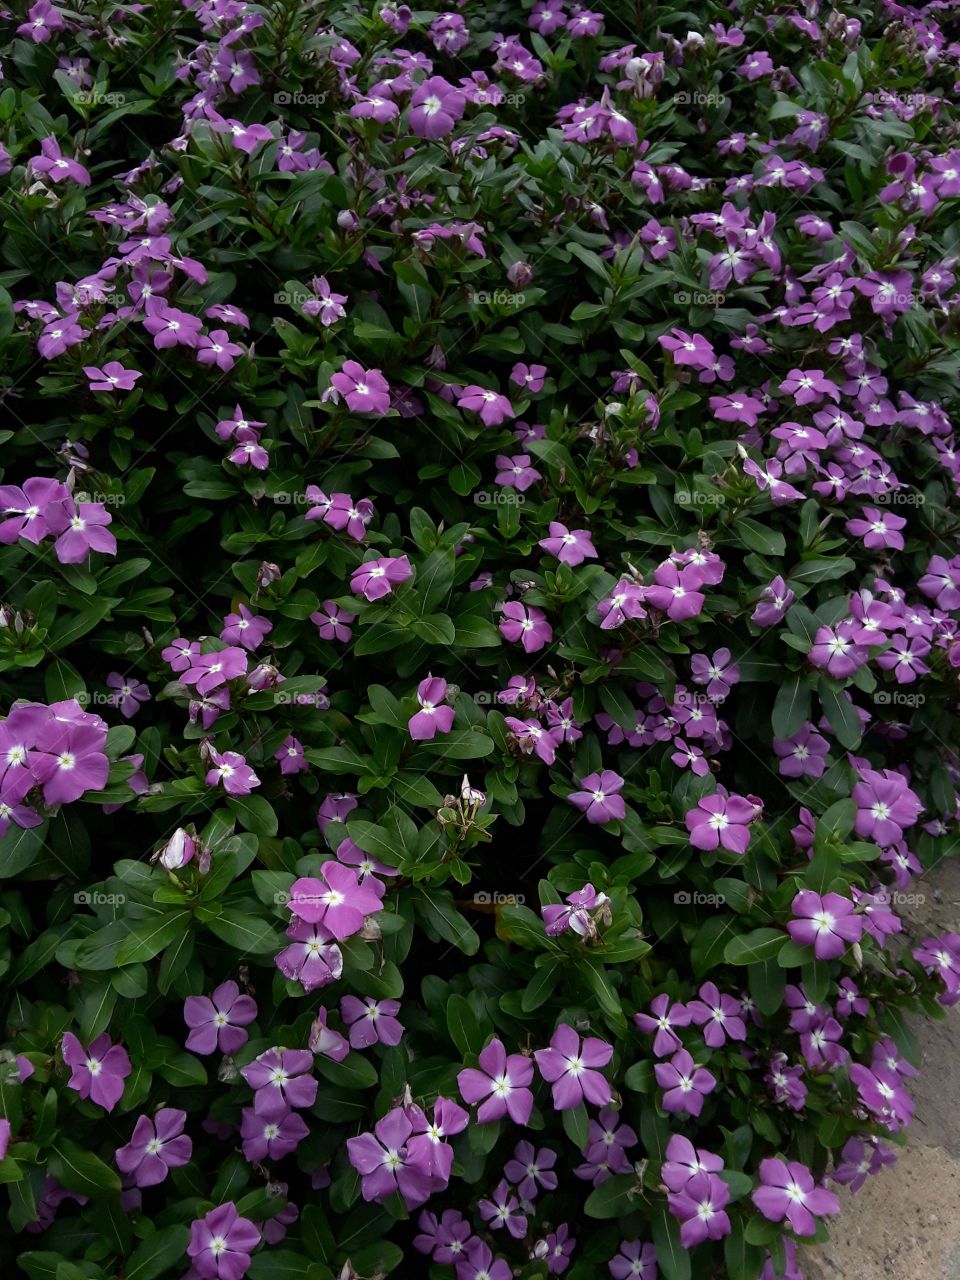 Beautiful purple flowers that pop out against the green leaves.